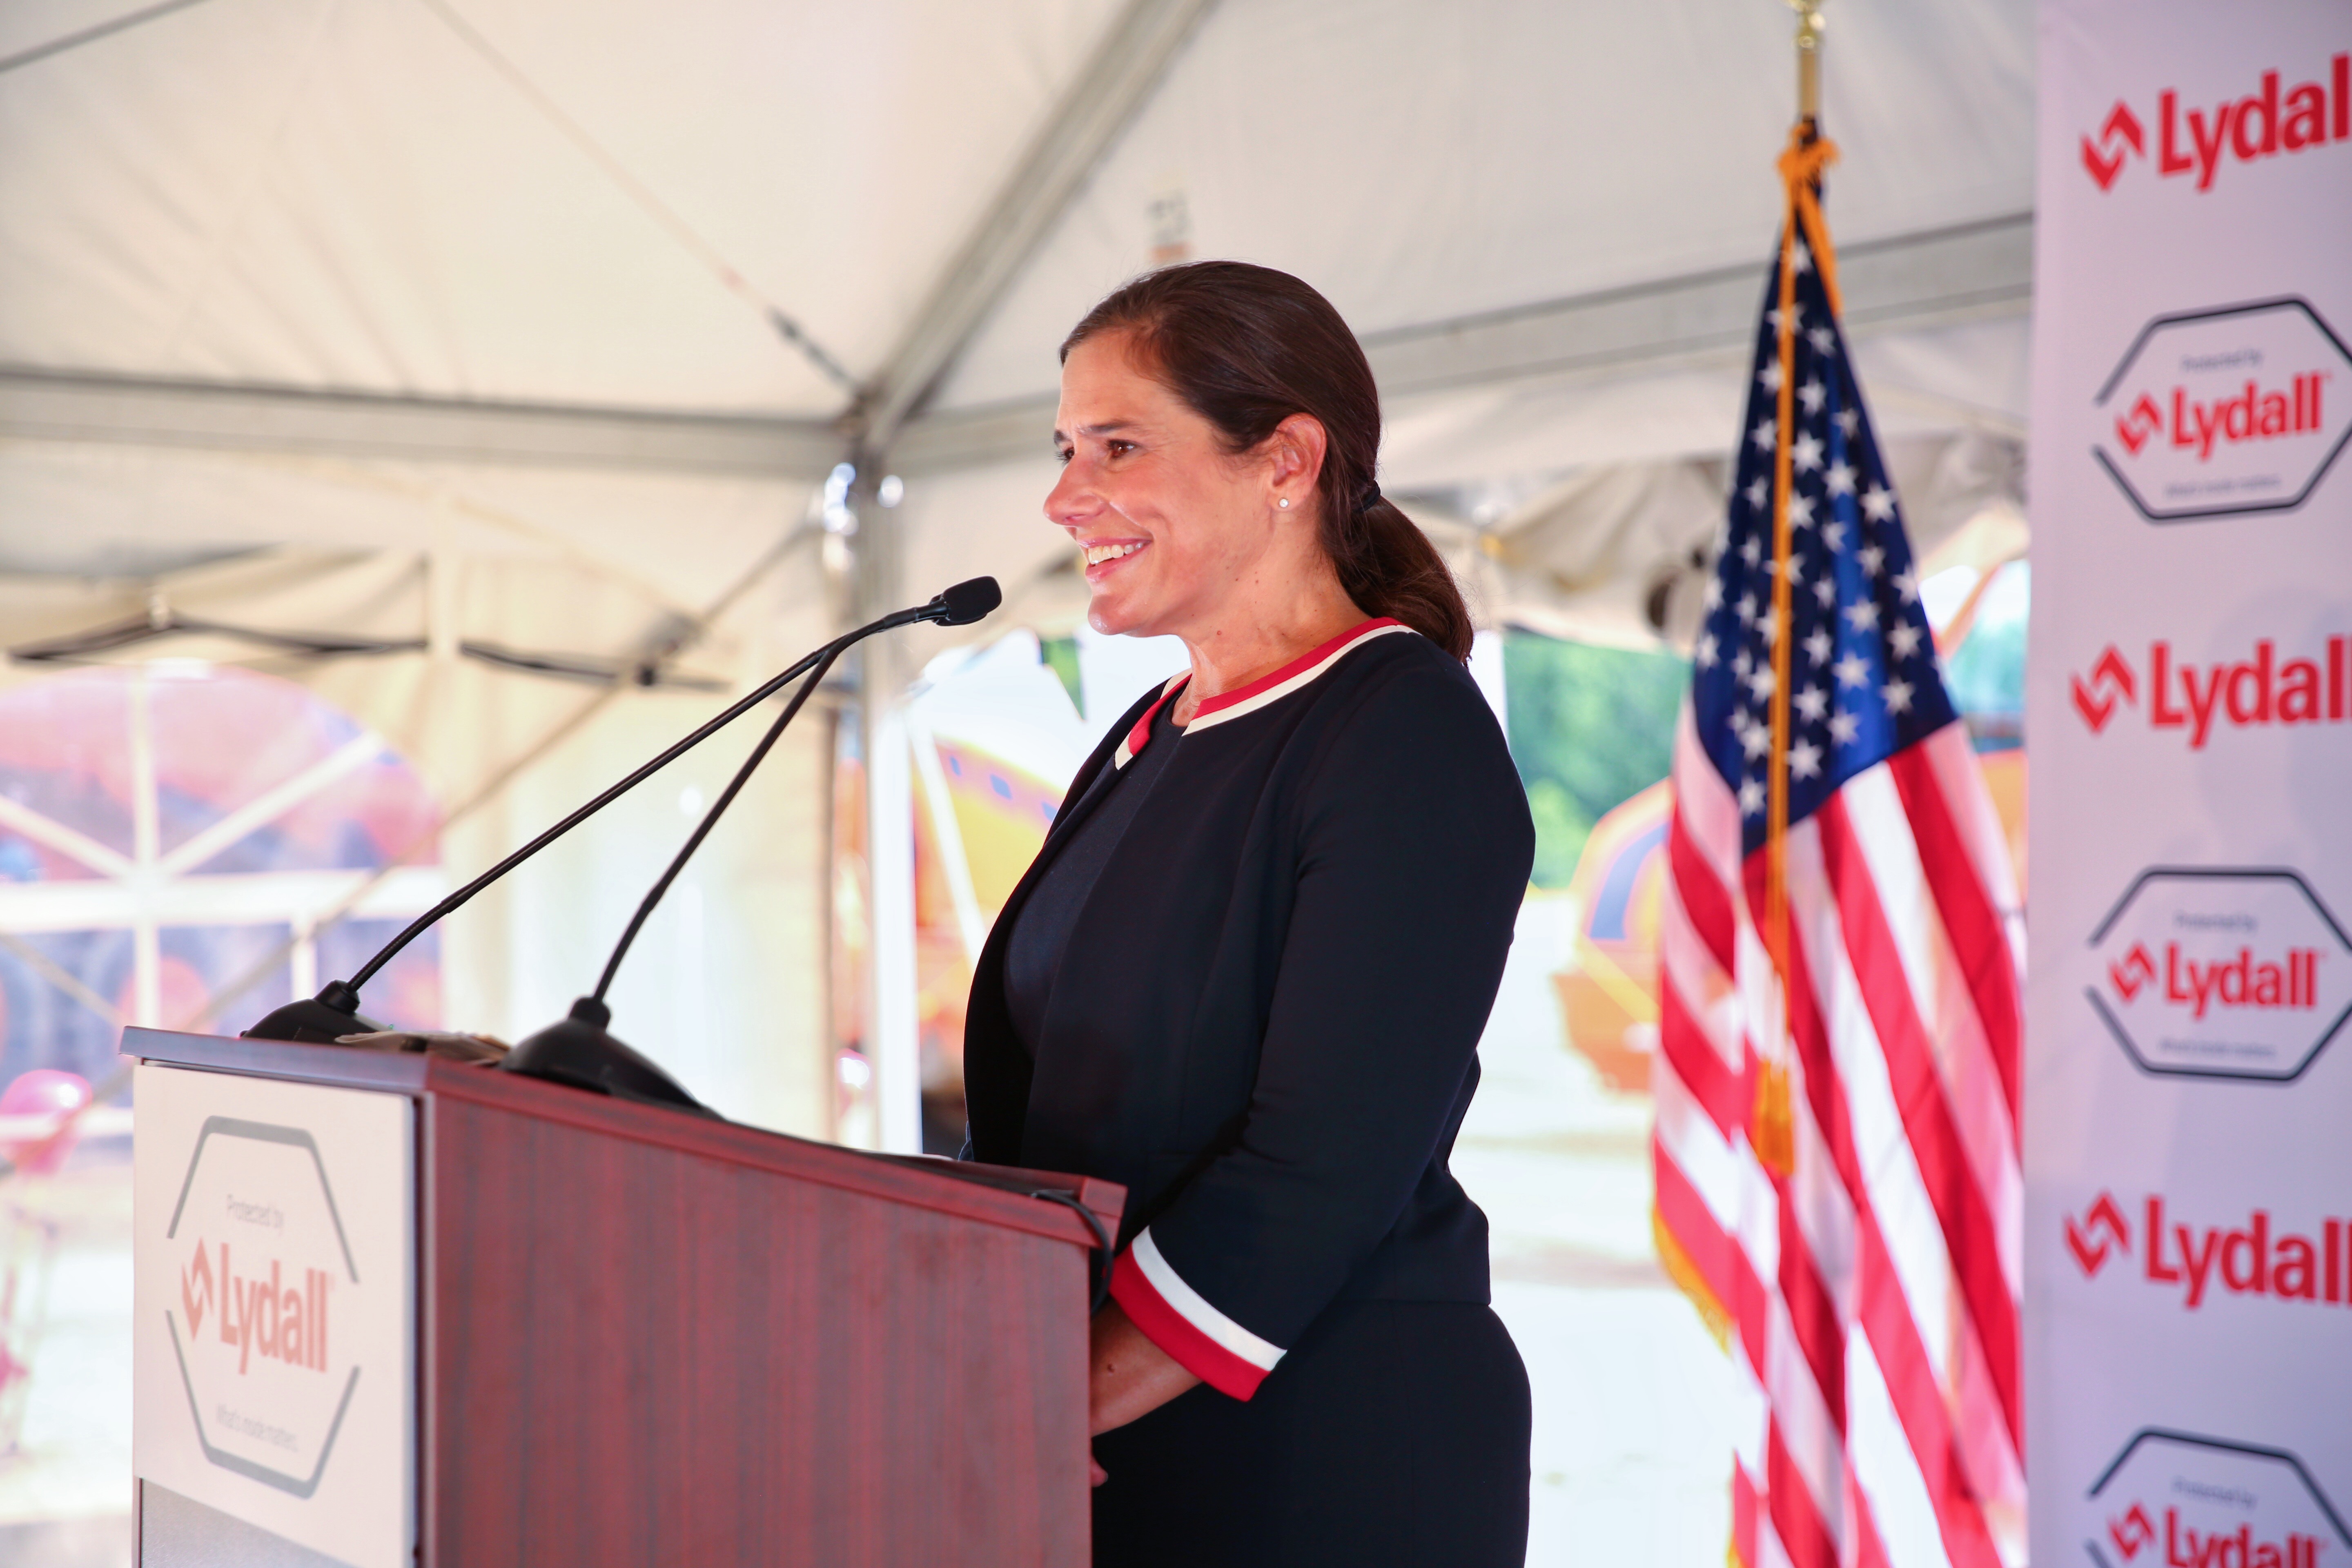 Sara Greenstein, president and CEO of Lydall, at the ground-breaking ceremony. Photo Regan Cleminson for Lydall.